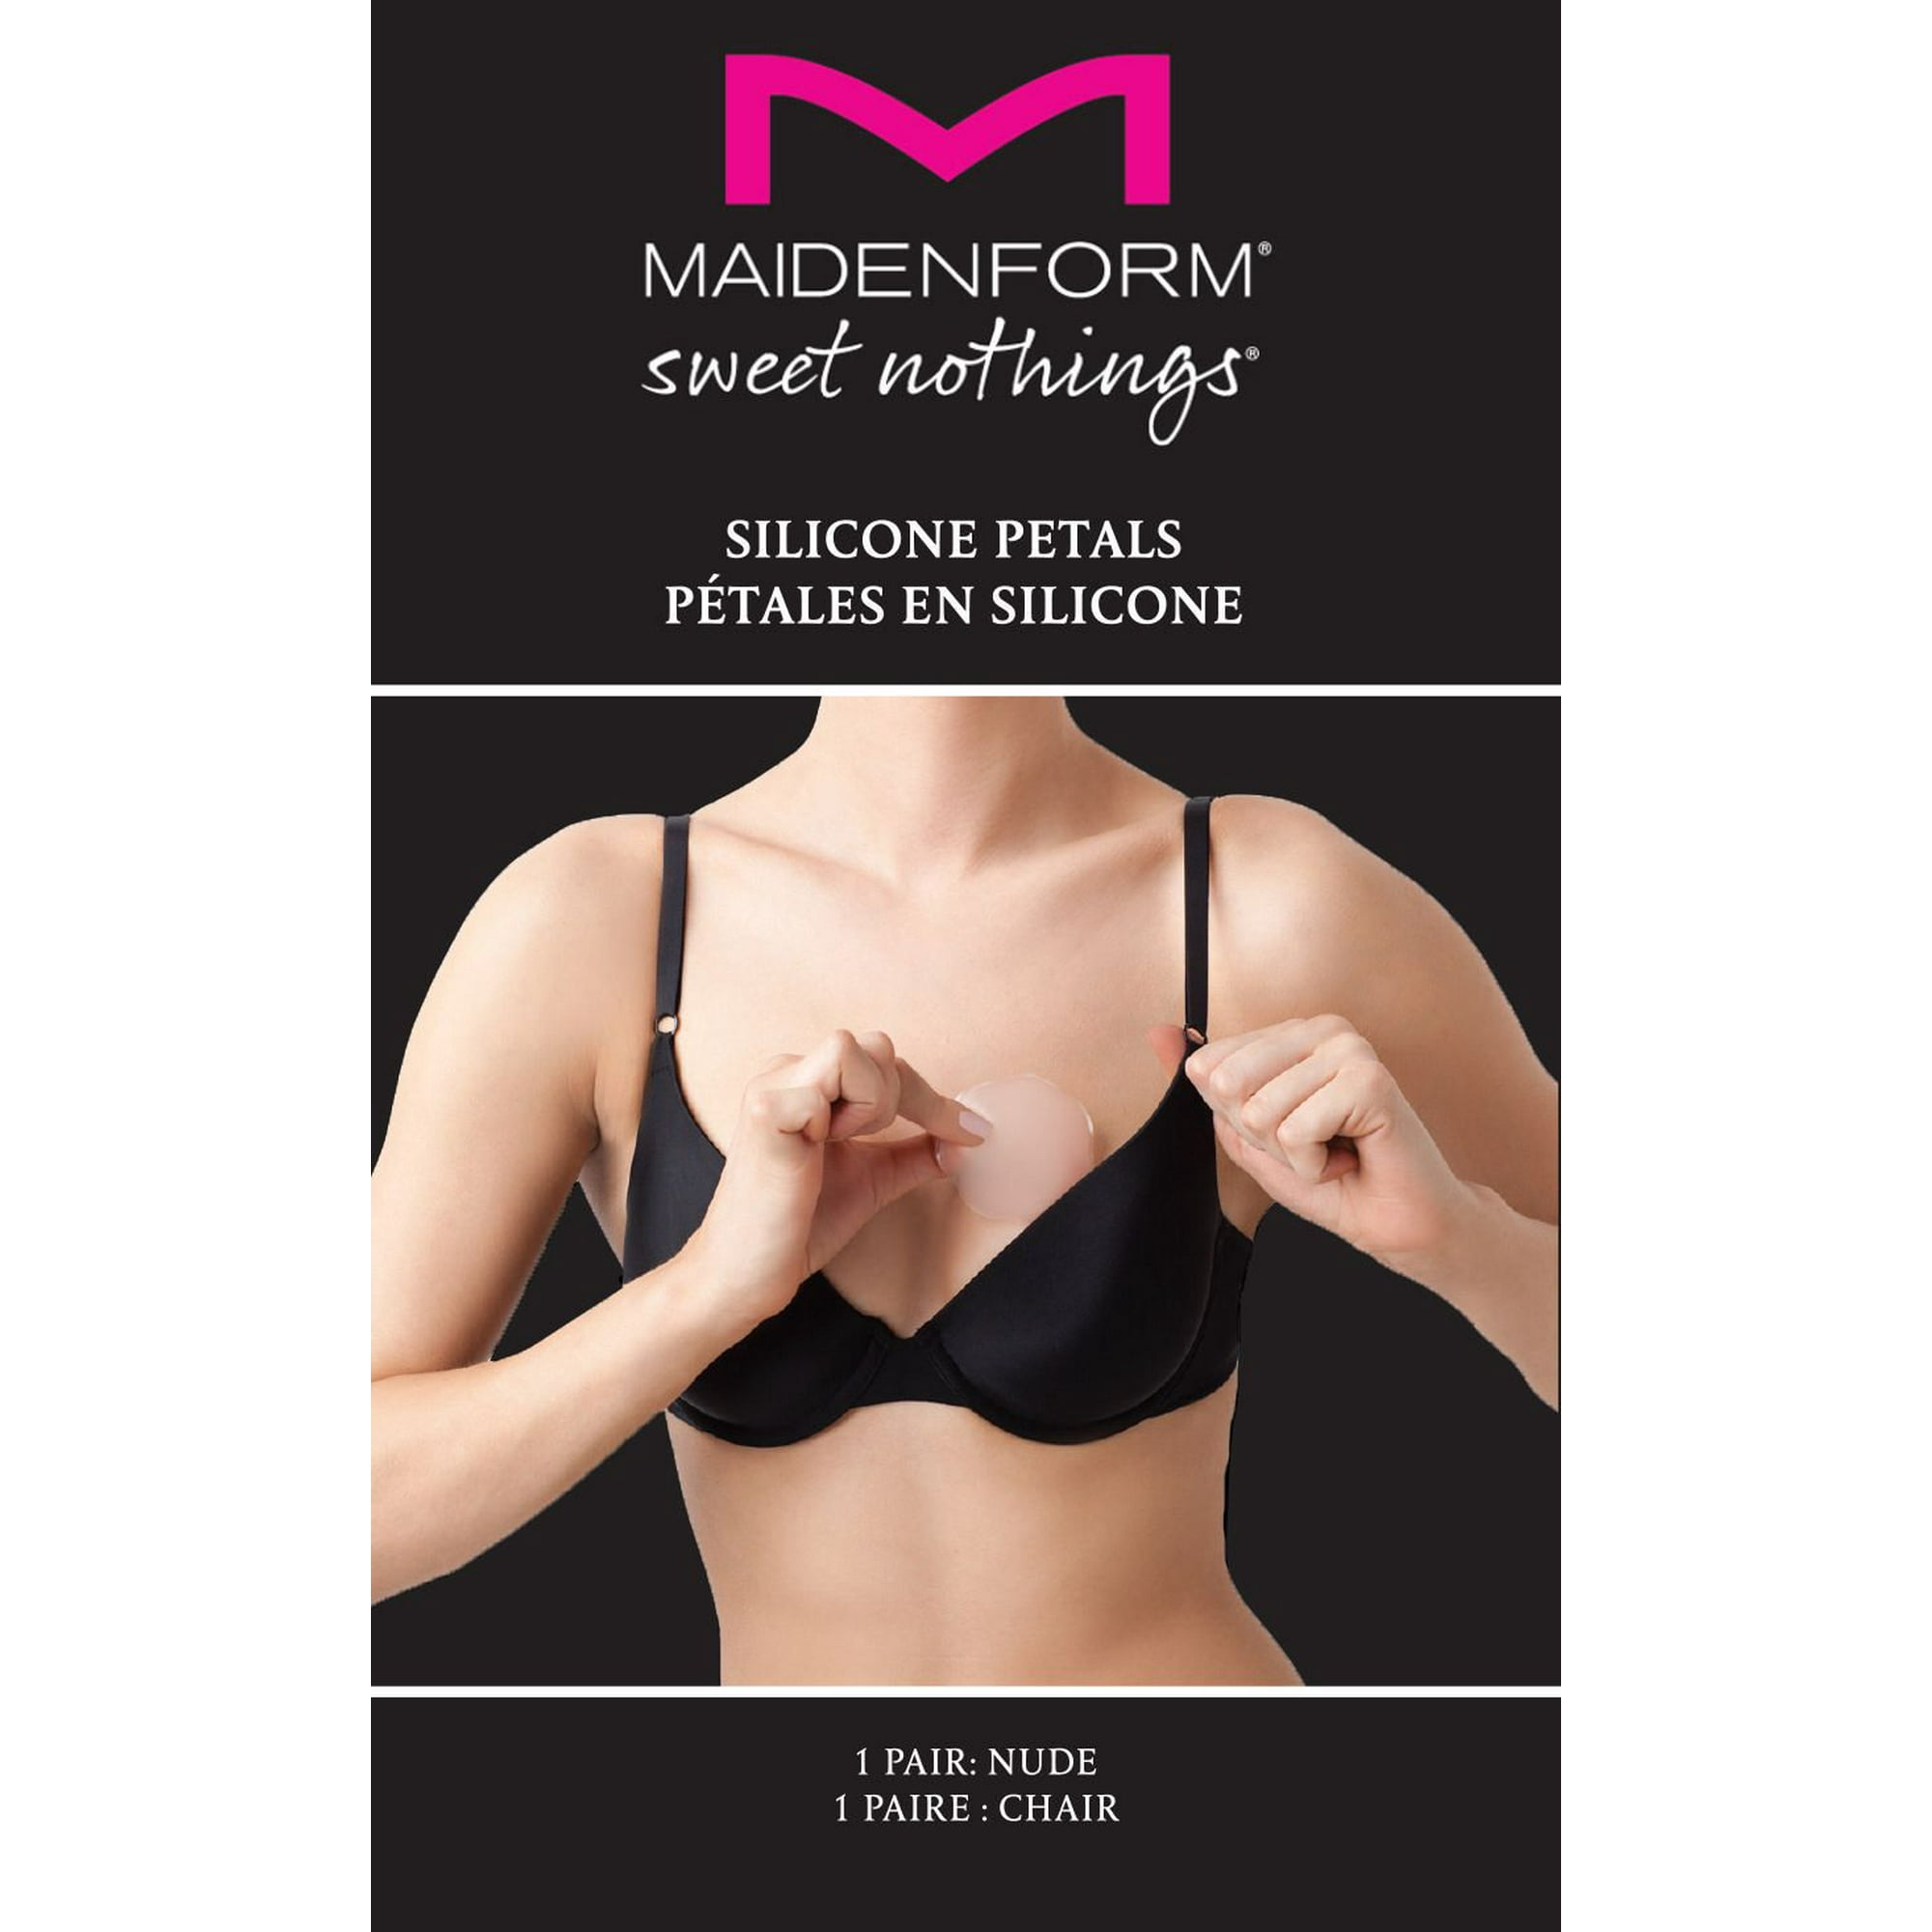 Maidenform Sweet Nothings Silicone Petals 